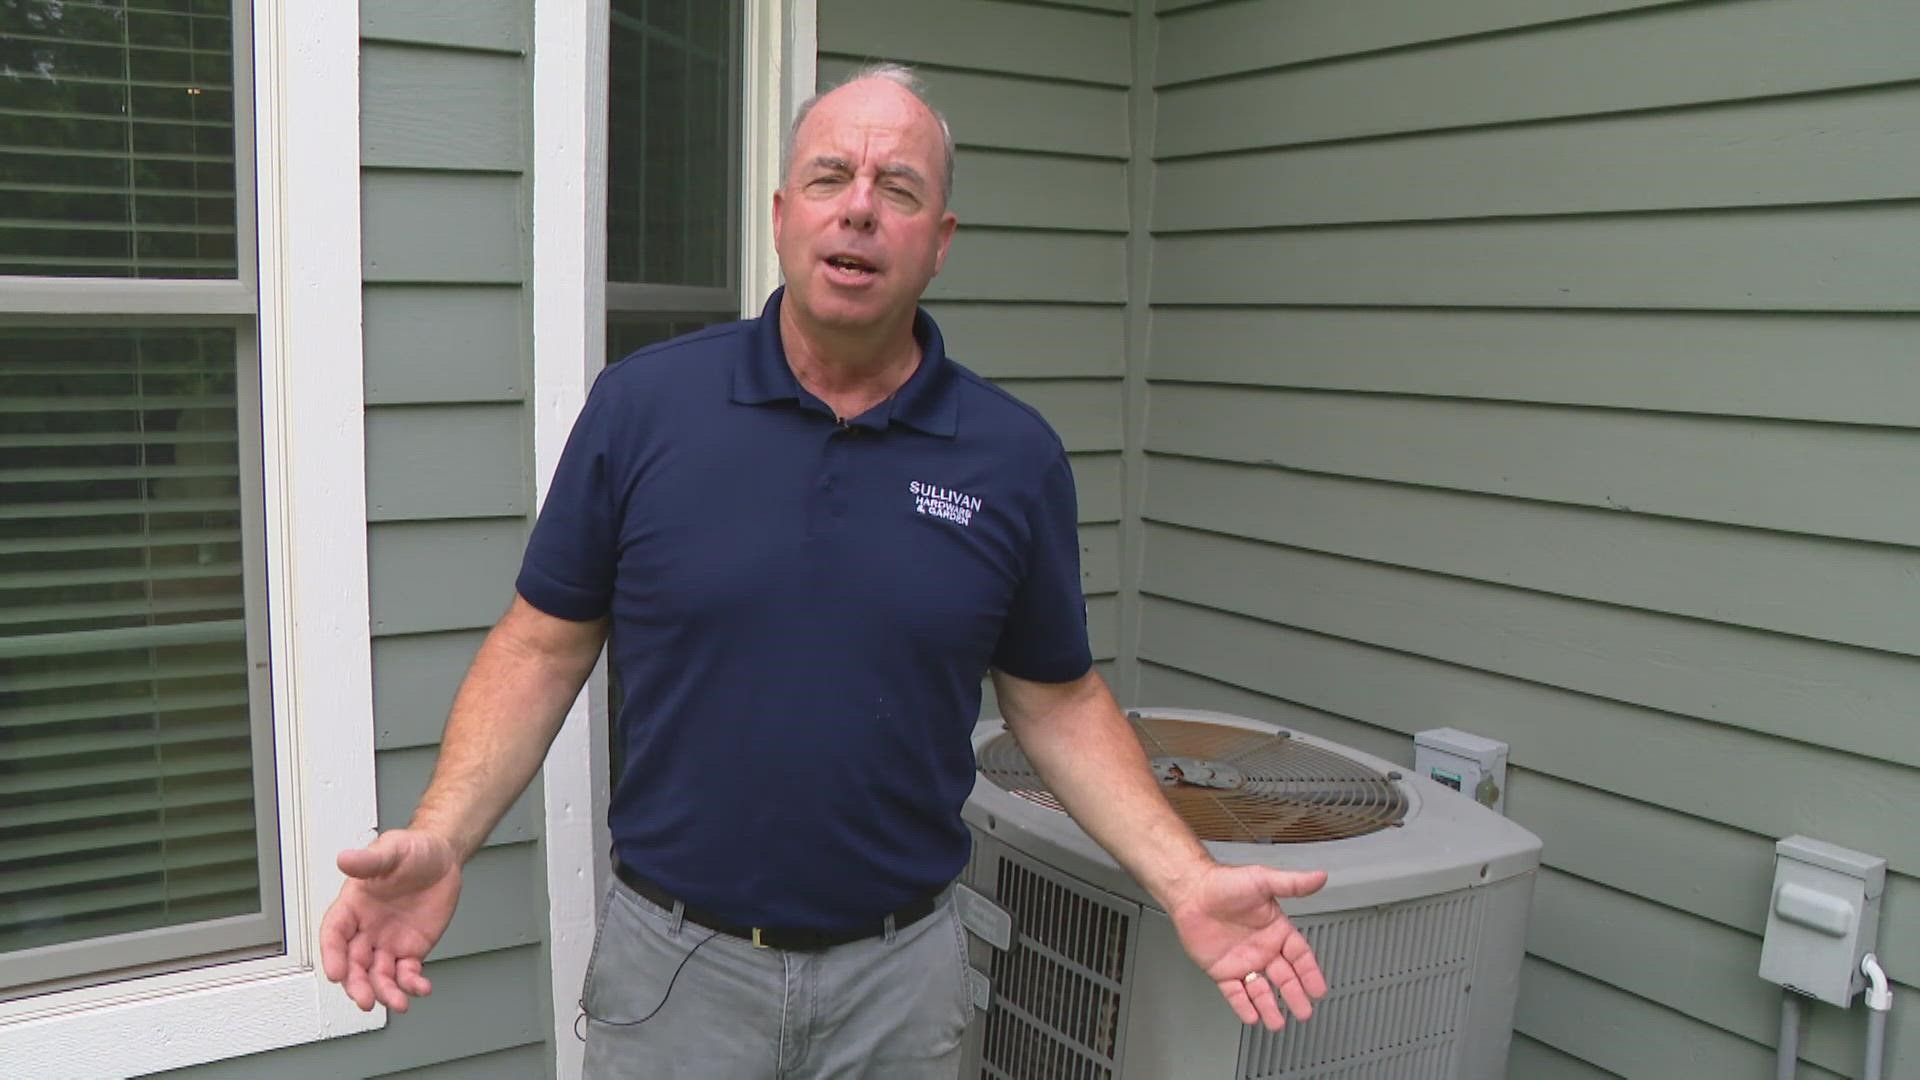 Pat Sullivan shows you how to get your home ready for summer from AC maintenance to taking care of your grill.